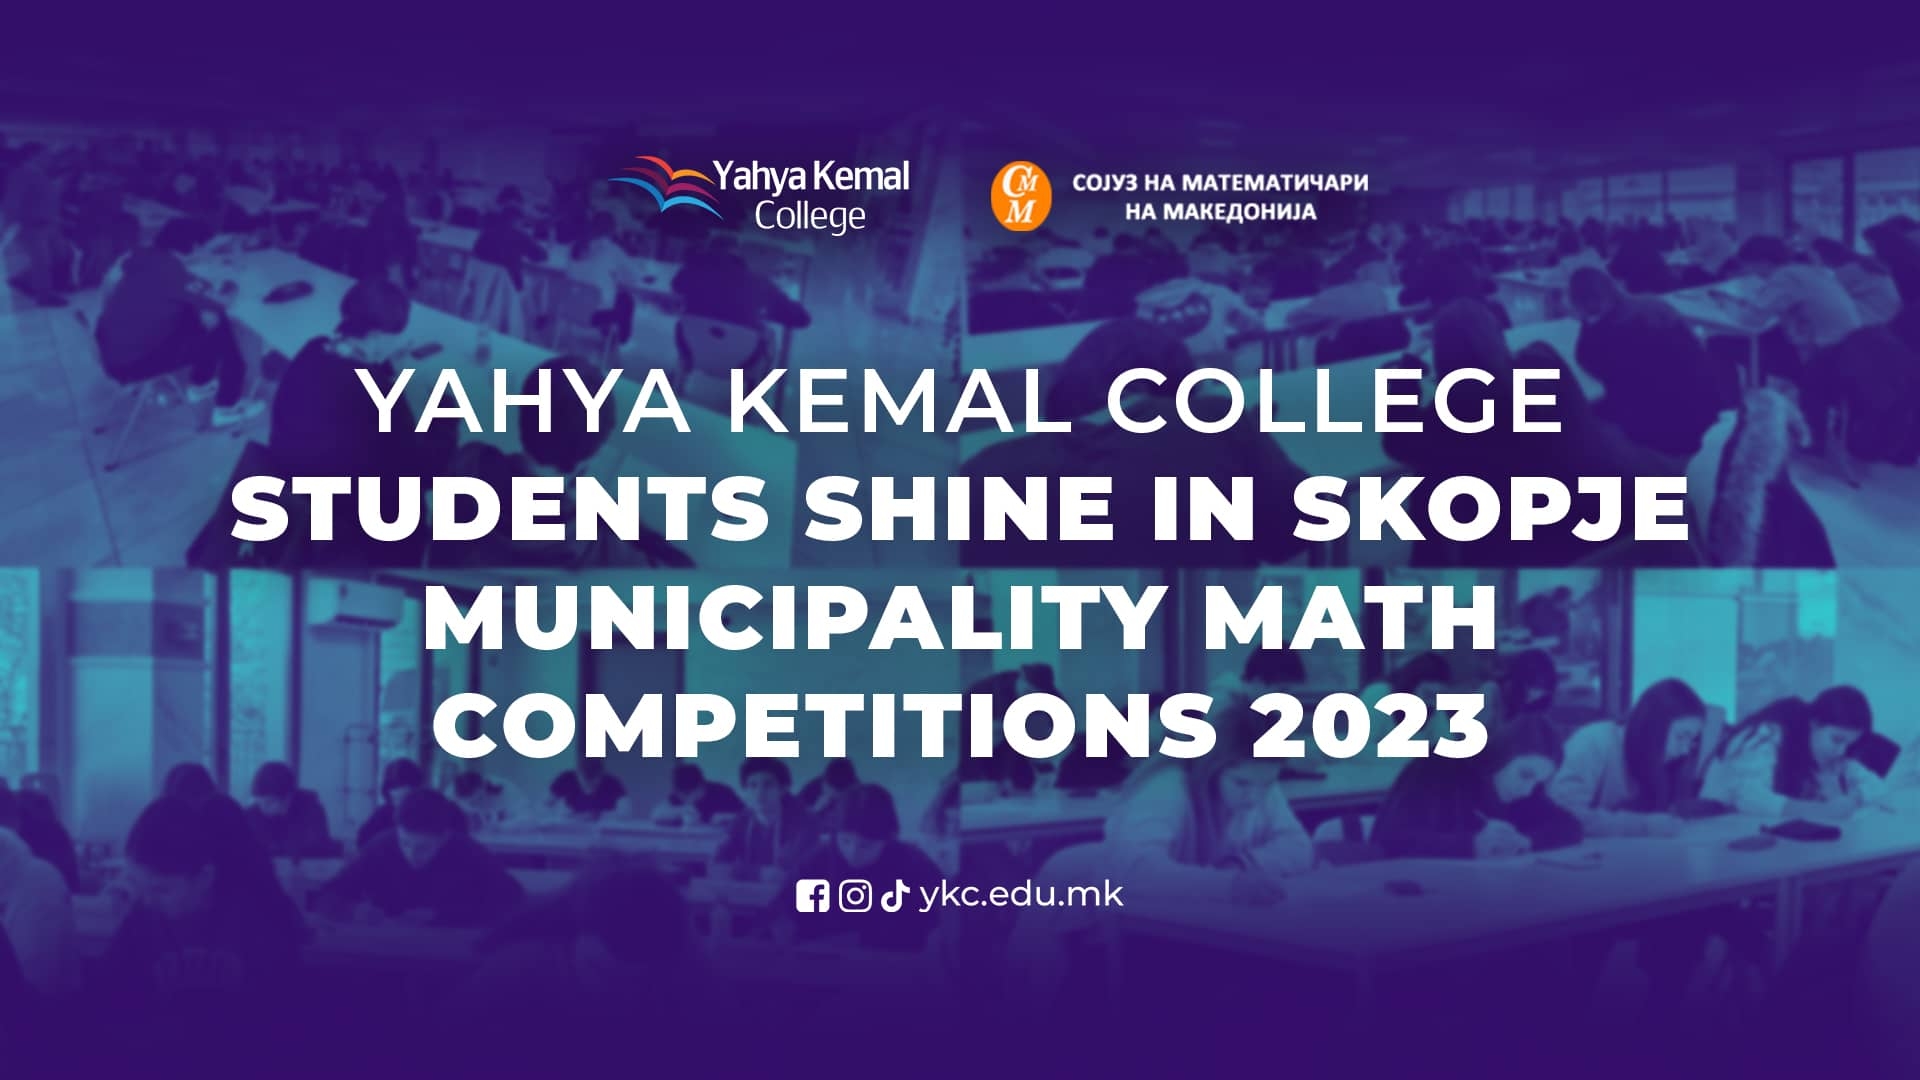 Yahya Kemal College students shine in Skopje Municipality Math Competitions